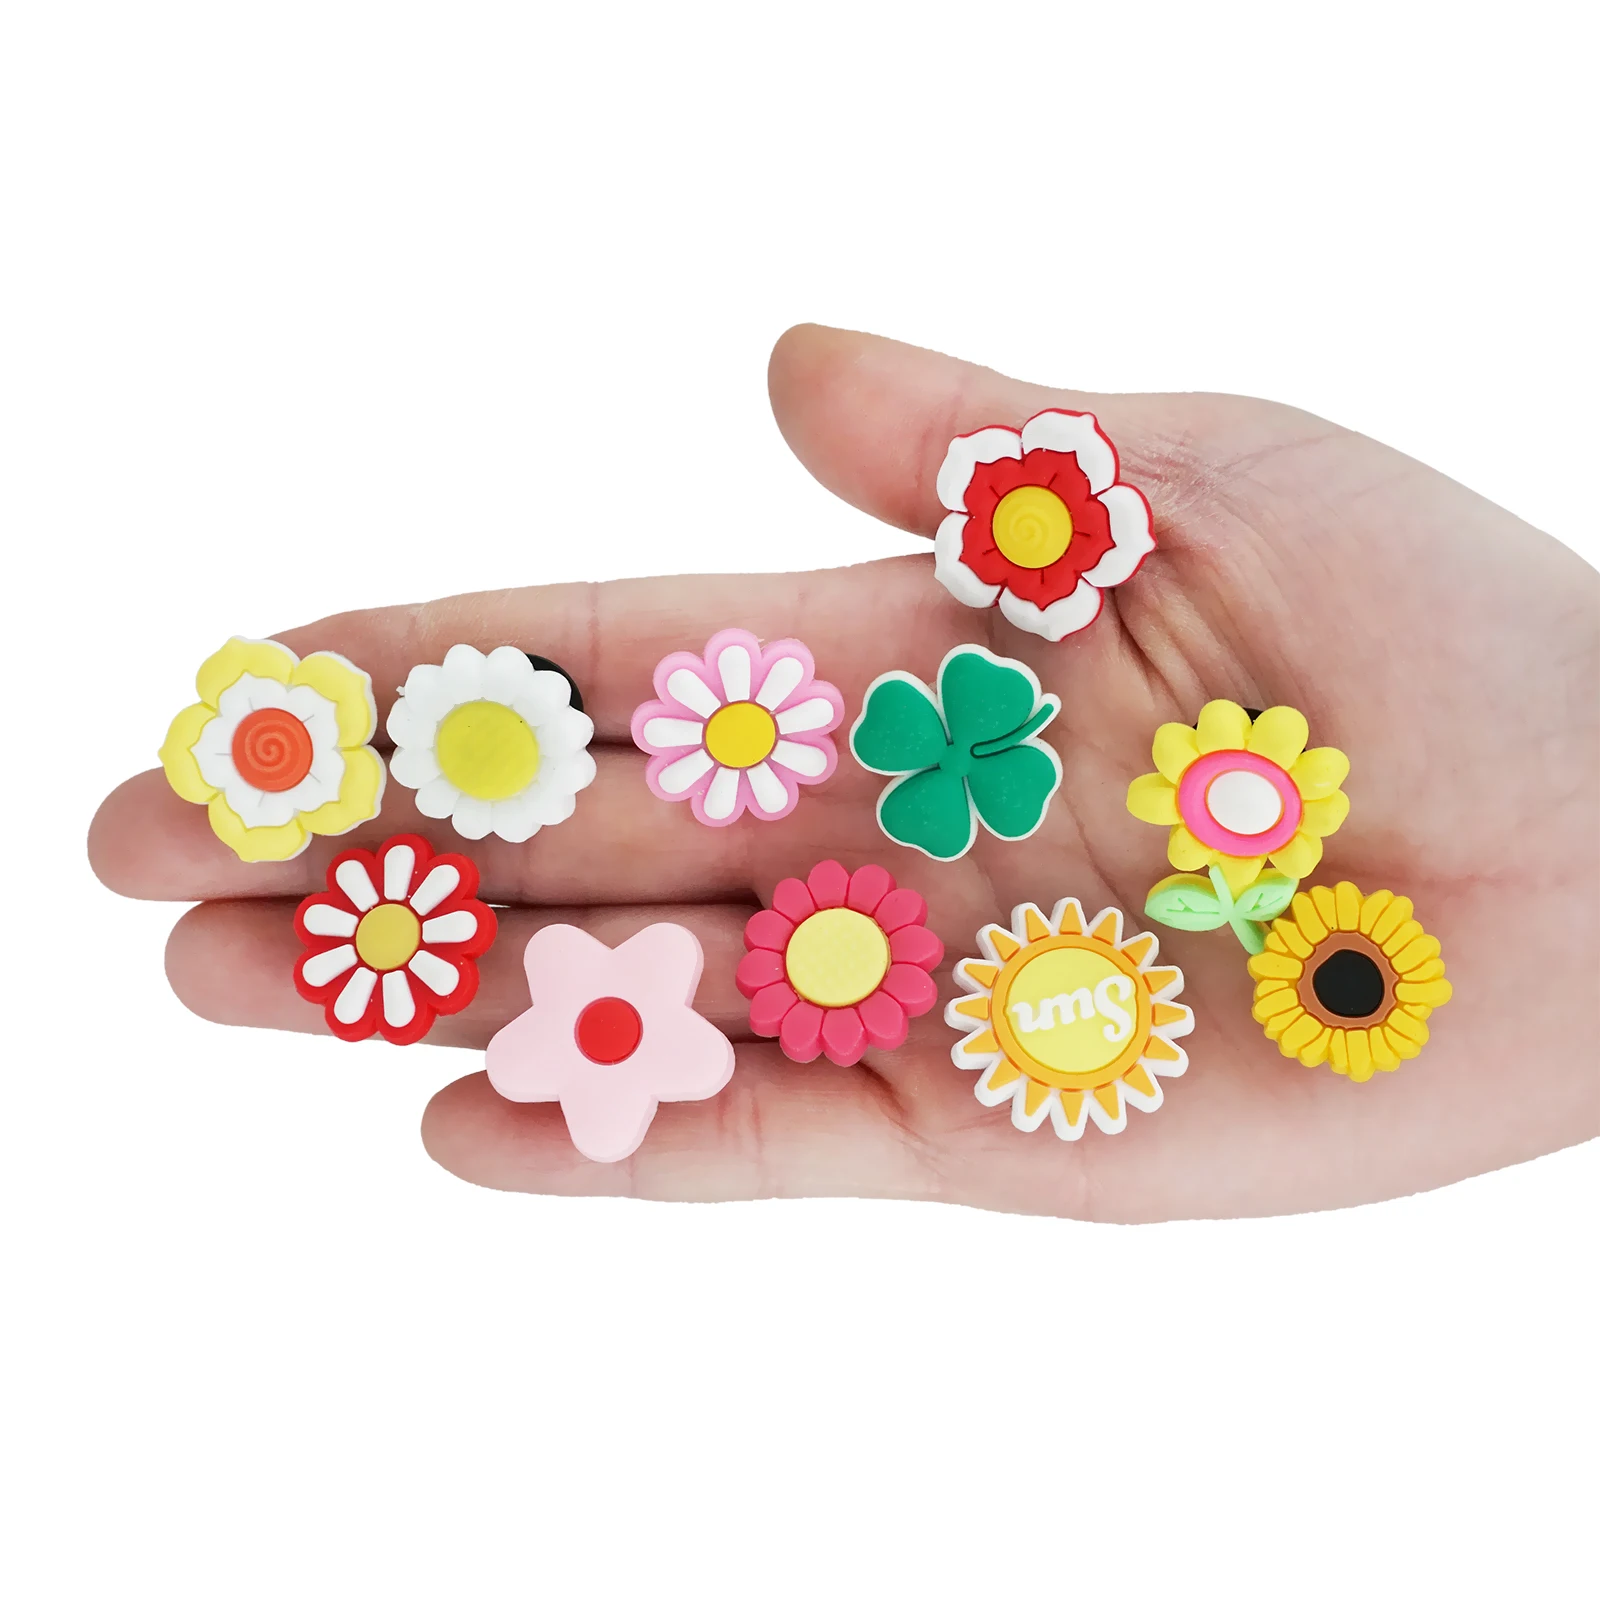 1 Pcs Flowers Shoe Charms Colorful Flowers Sunflower Adorable Shoe Buckles Ornament Accessories for Croc Jibz Gifts